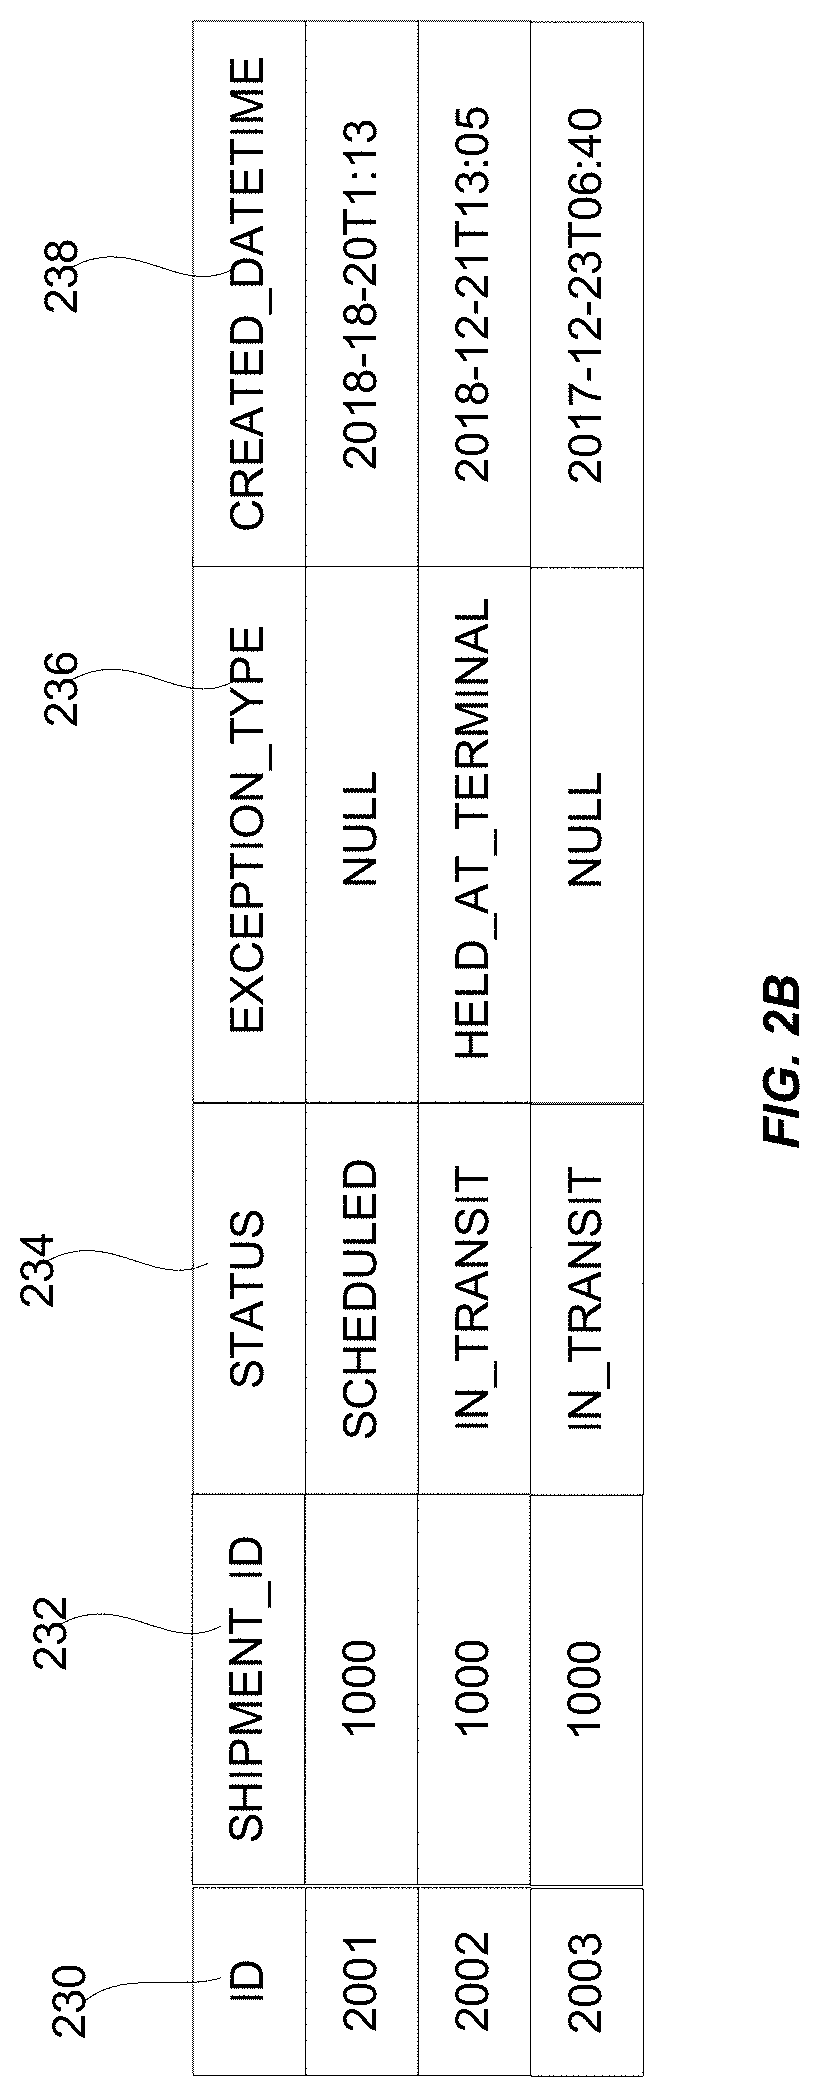 Intermediated shipping logistics system for facilitating delivery appointment scheduling with outsourced carrier systems